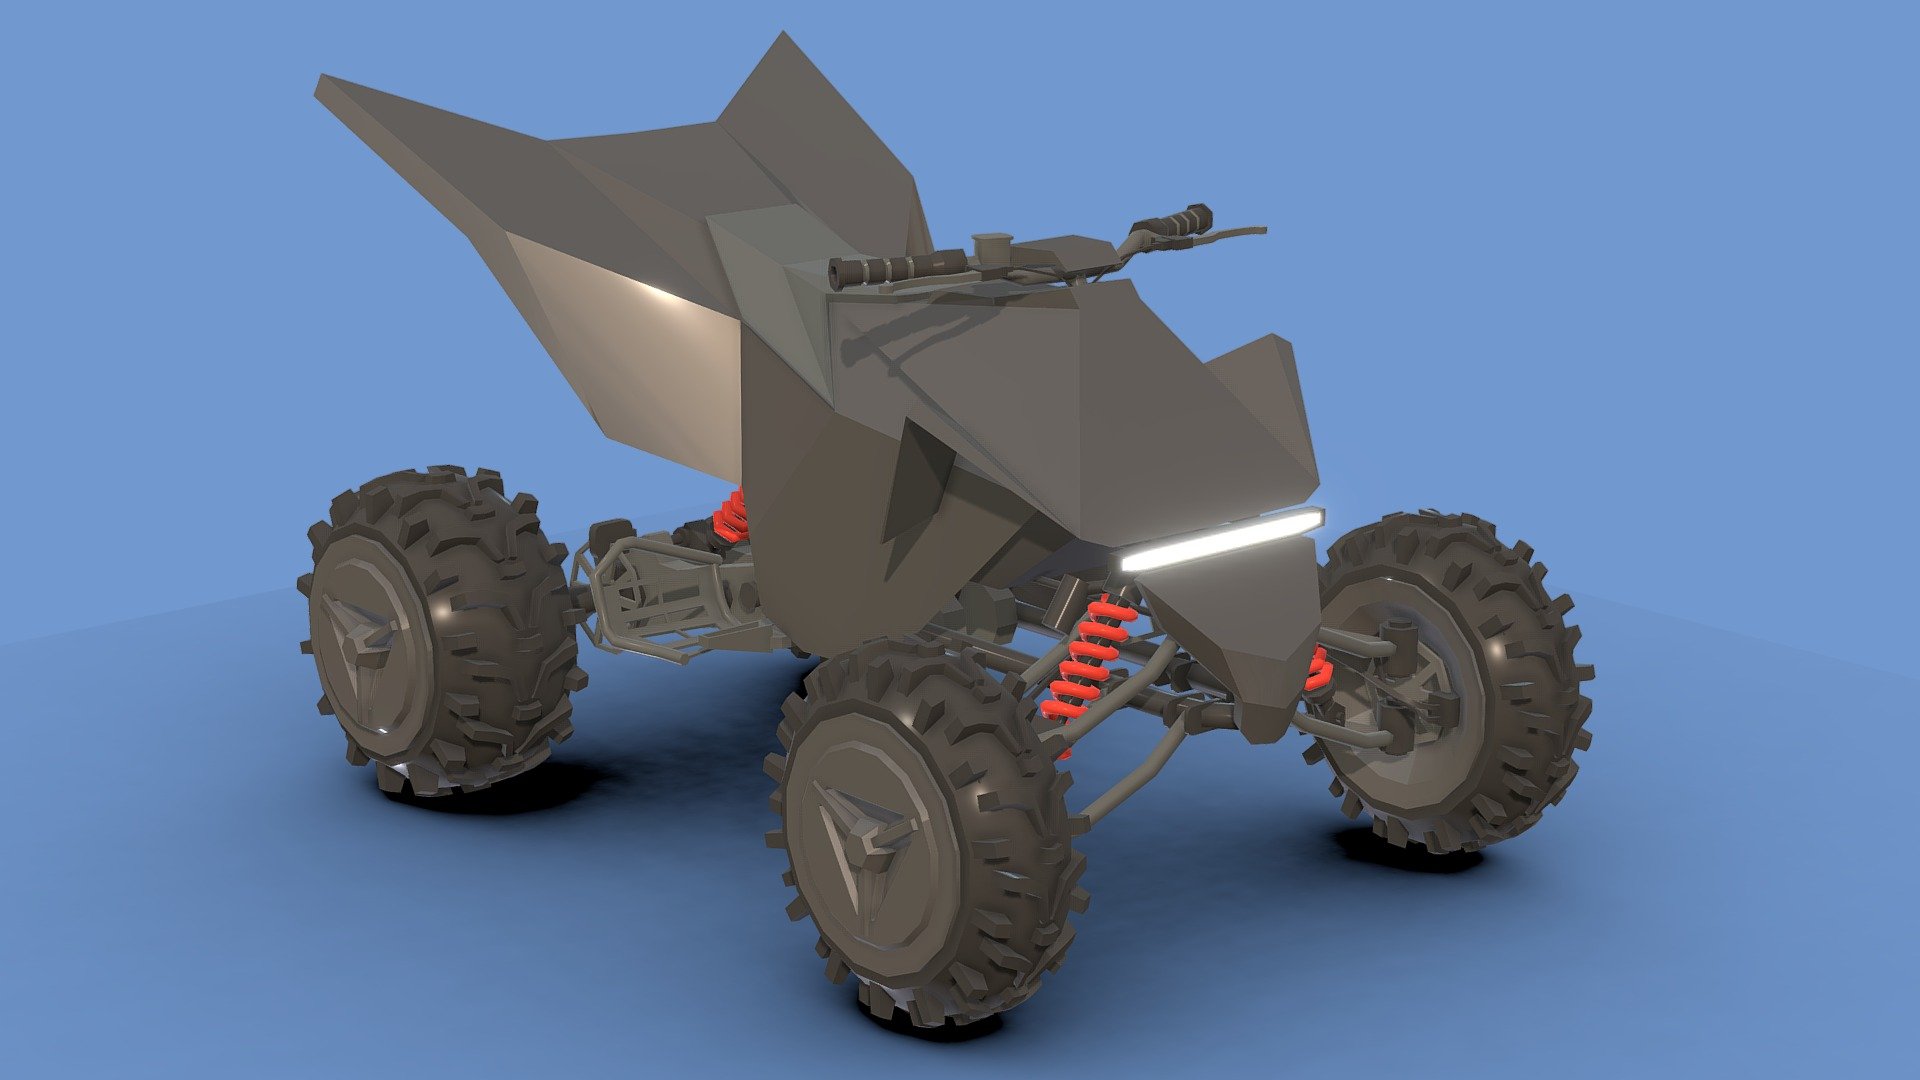 Low-Poly Quad bike1.

You can use these models in any game and project.

This model is made with order and precision.

The color of the body and wheels can be changed.

Separated parts (body_wheel steer.

Very low poly.

Average poly count: 17/000 Tris.

Texture size: 128/256 (PNG).

Number of textures: 2.

Number of materials: 2.

Format: fbx, obj, 3d max 3d model